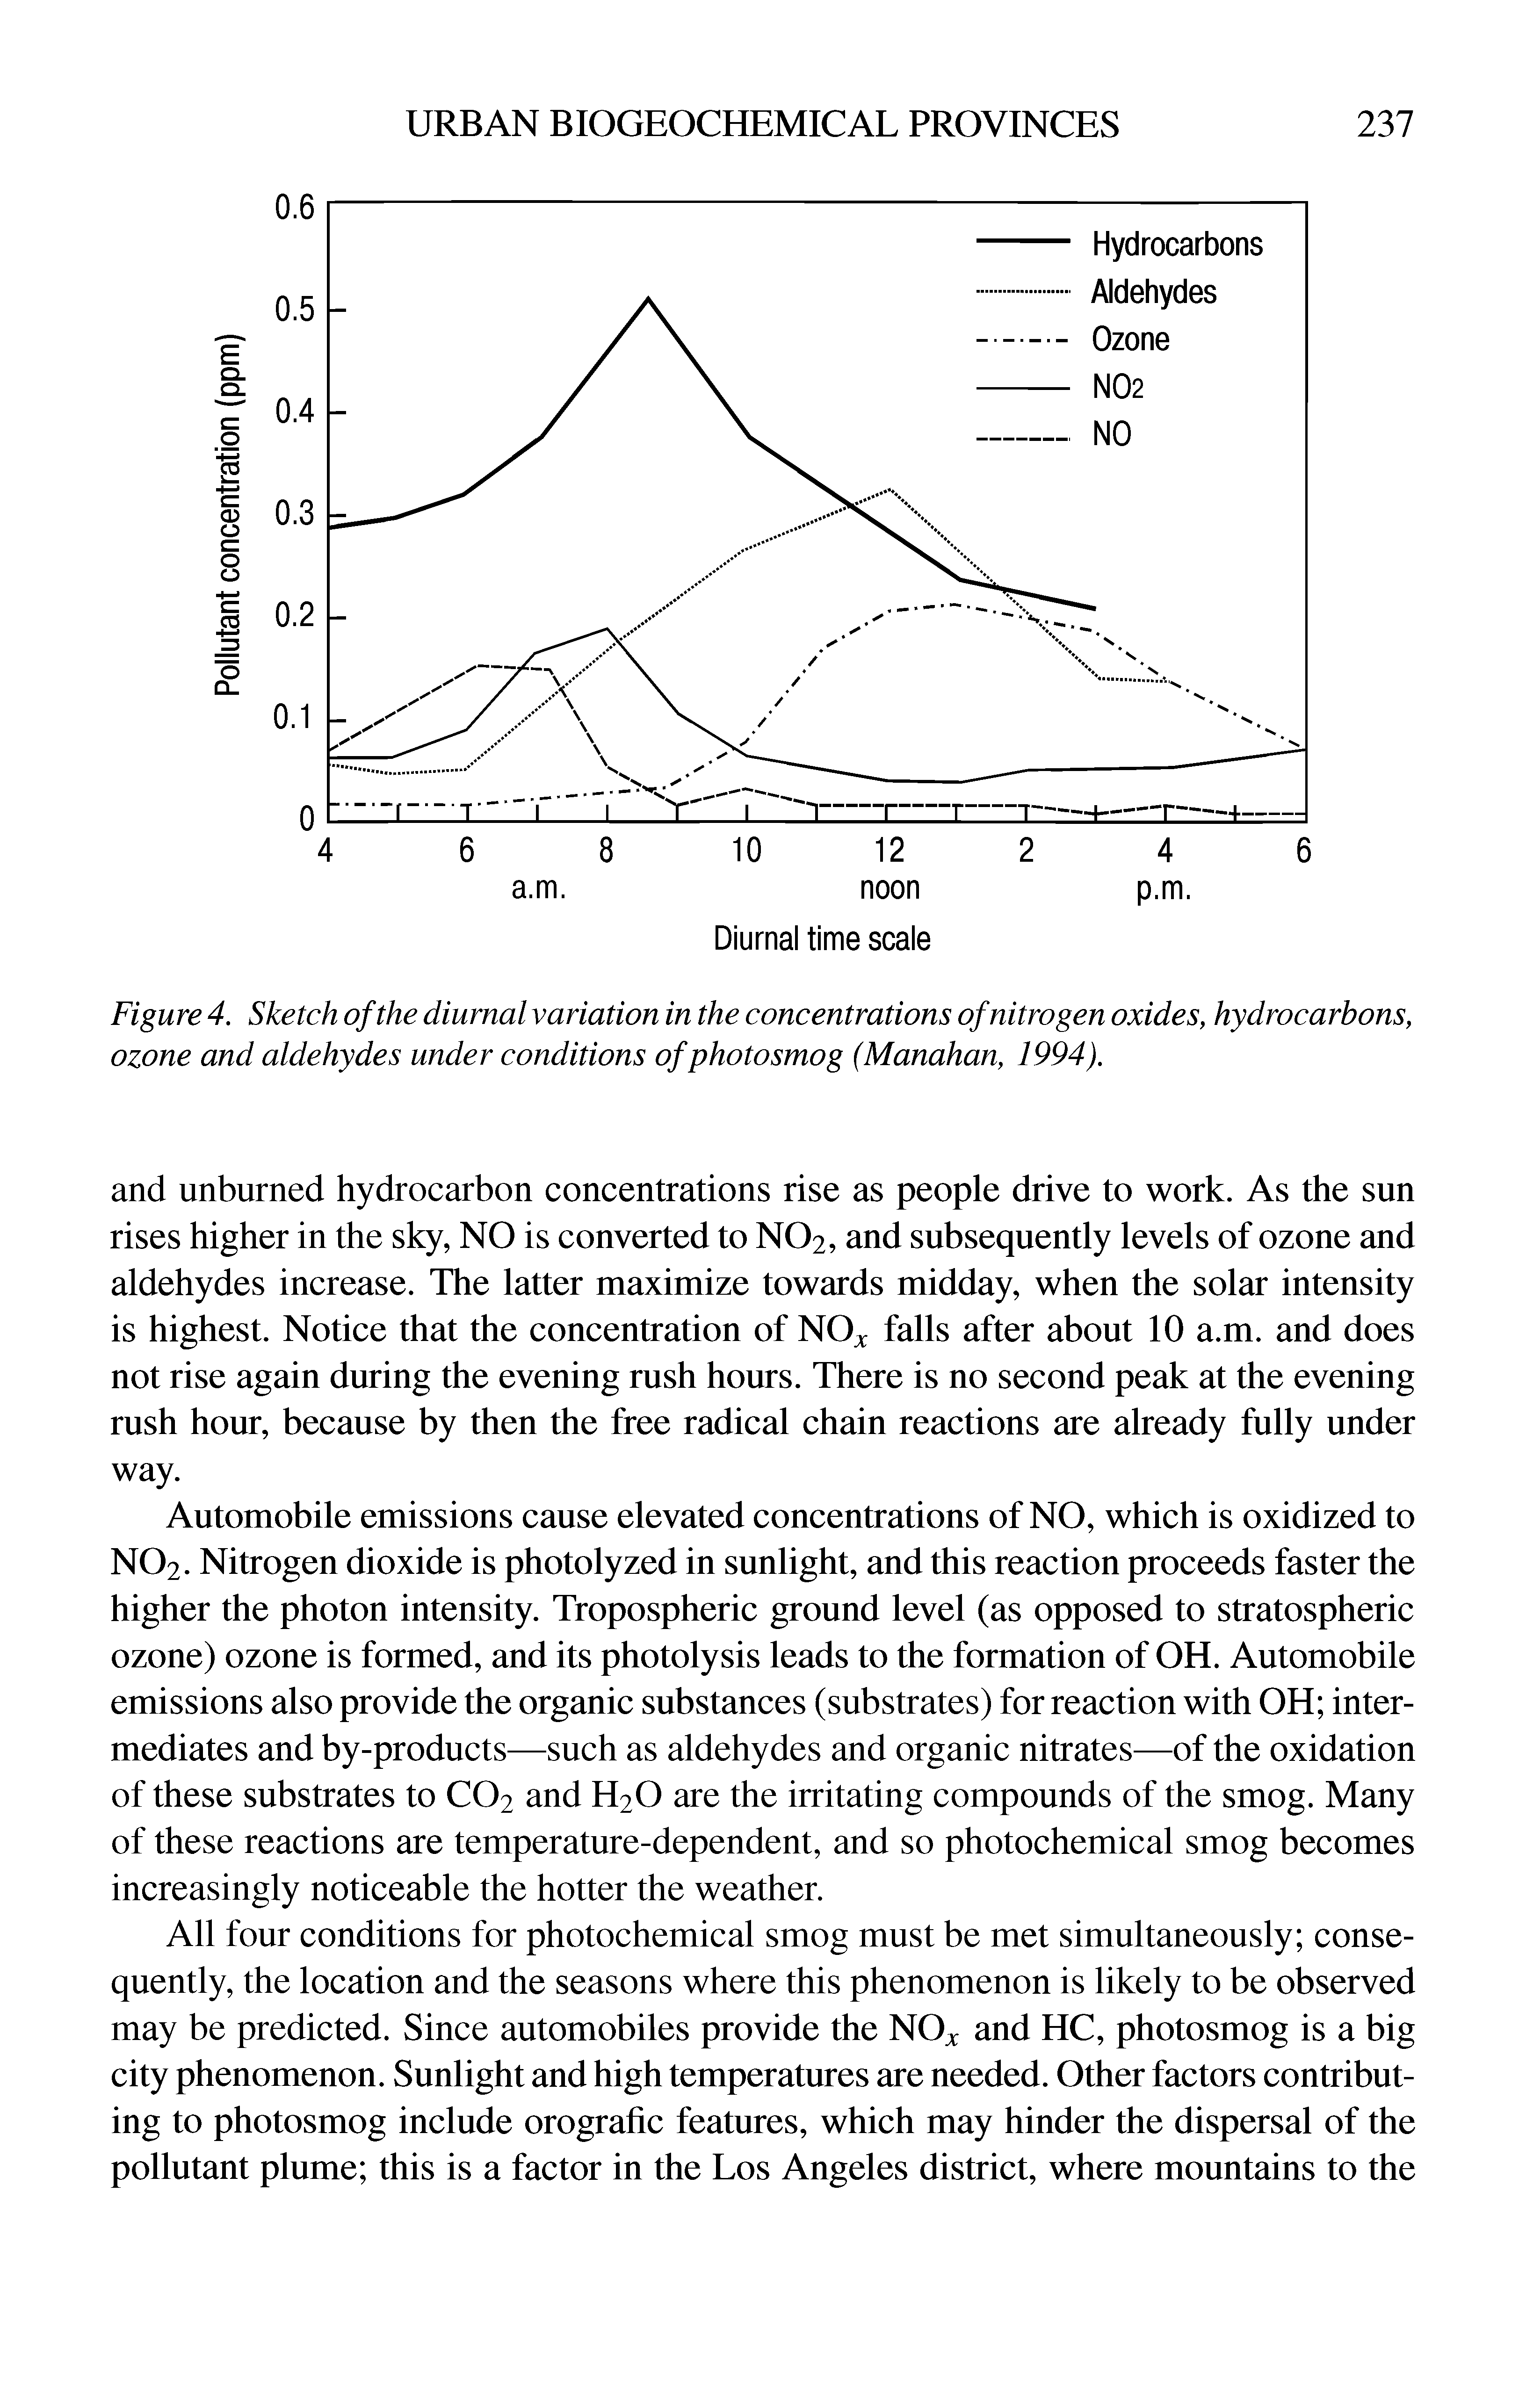 Figure 4. Sketch of the diurnal variation in the concentrations of nitrogen oxides, hydrocarbons, ozone and aldehydes under conditions of photosmog (Manahan, 1994).